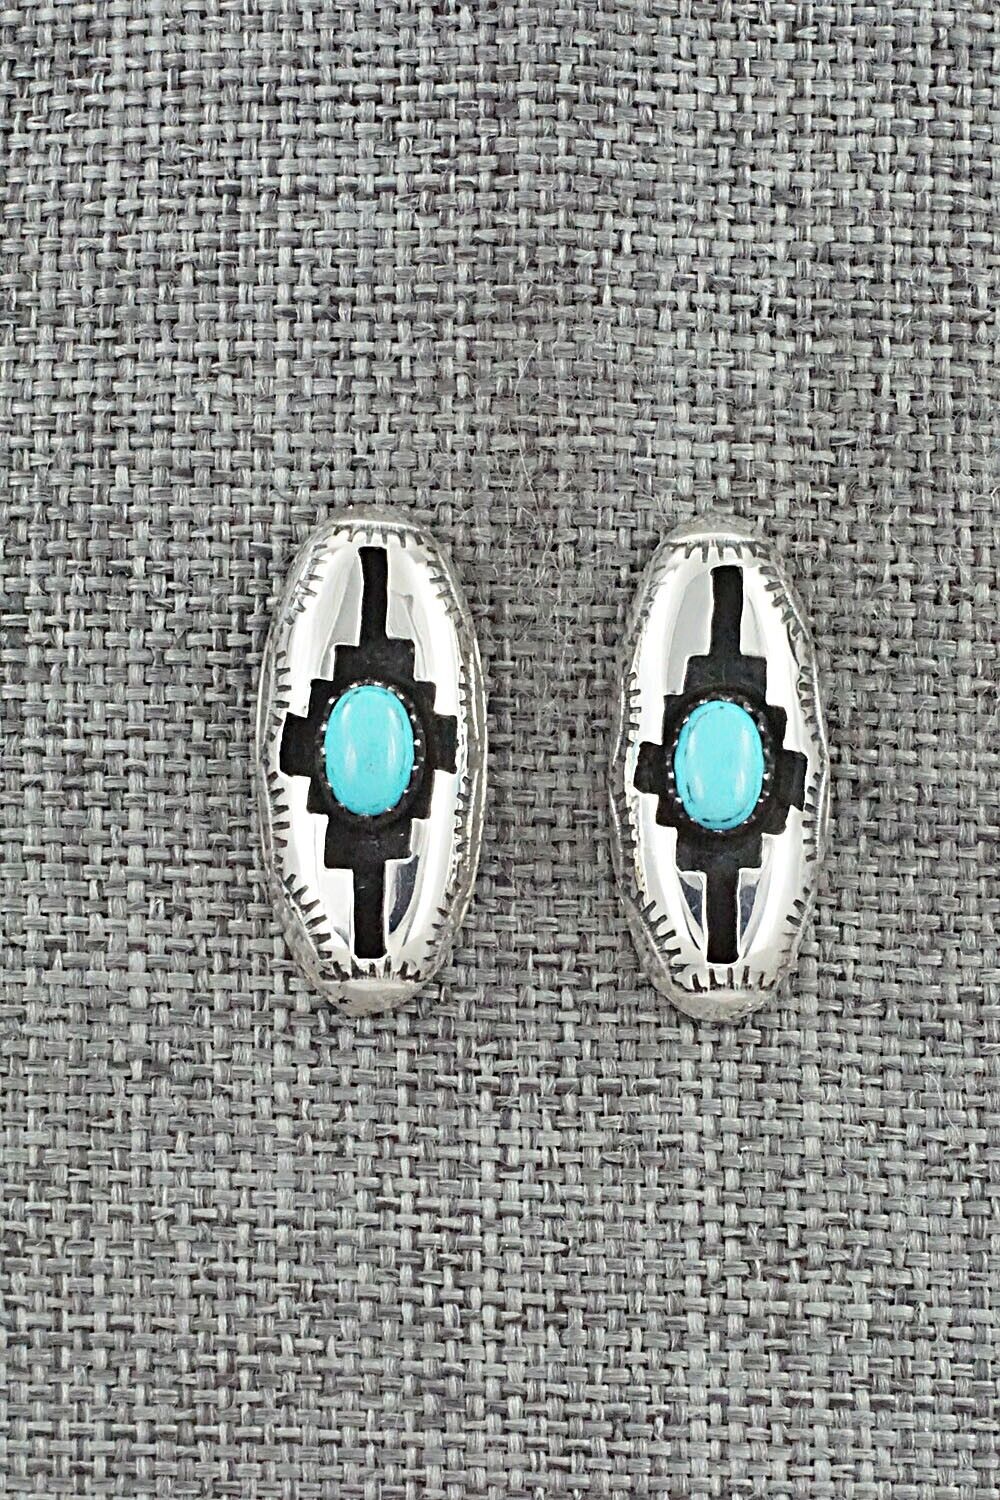 Turquoise & Sterling Silver Earrings - Felix Perry